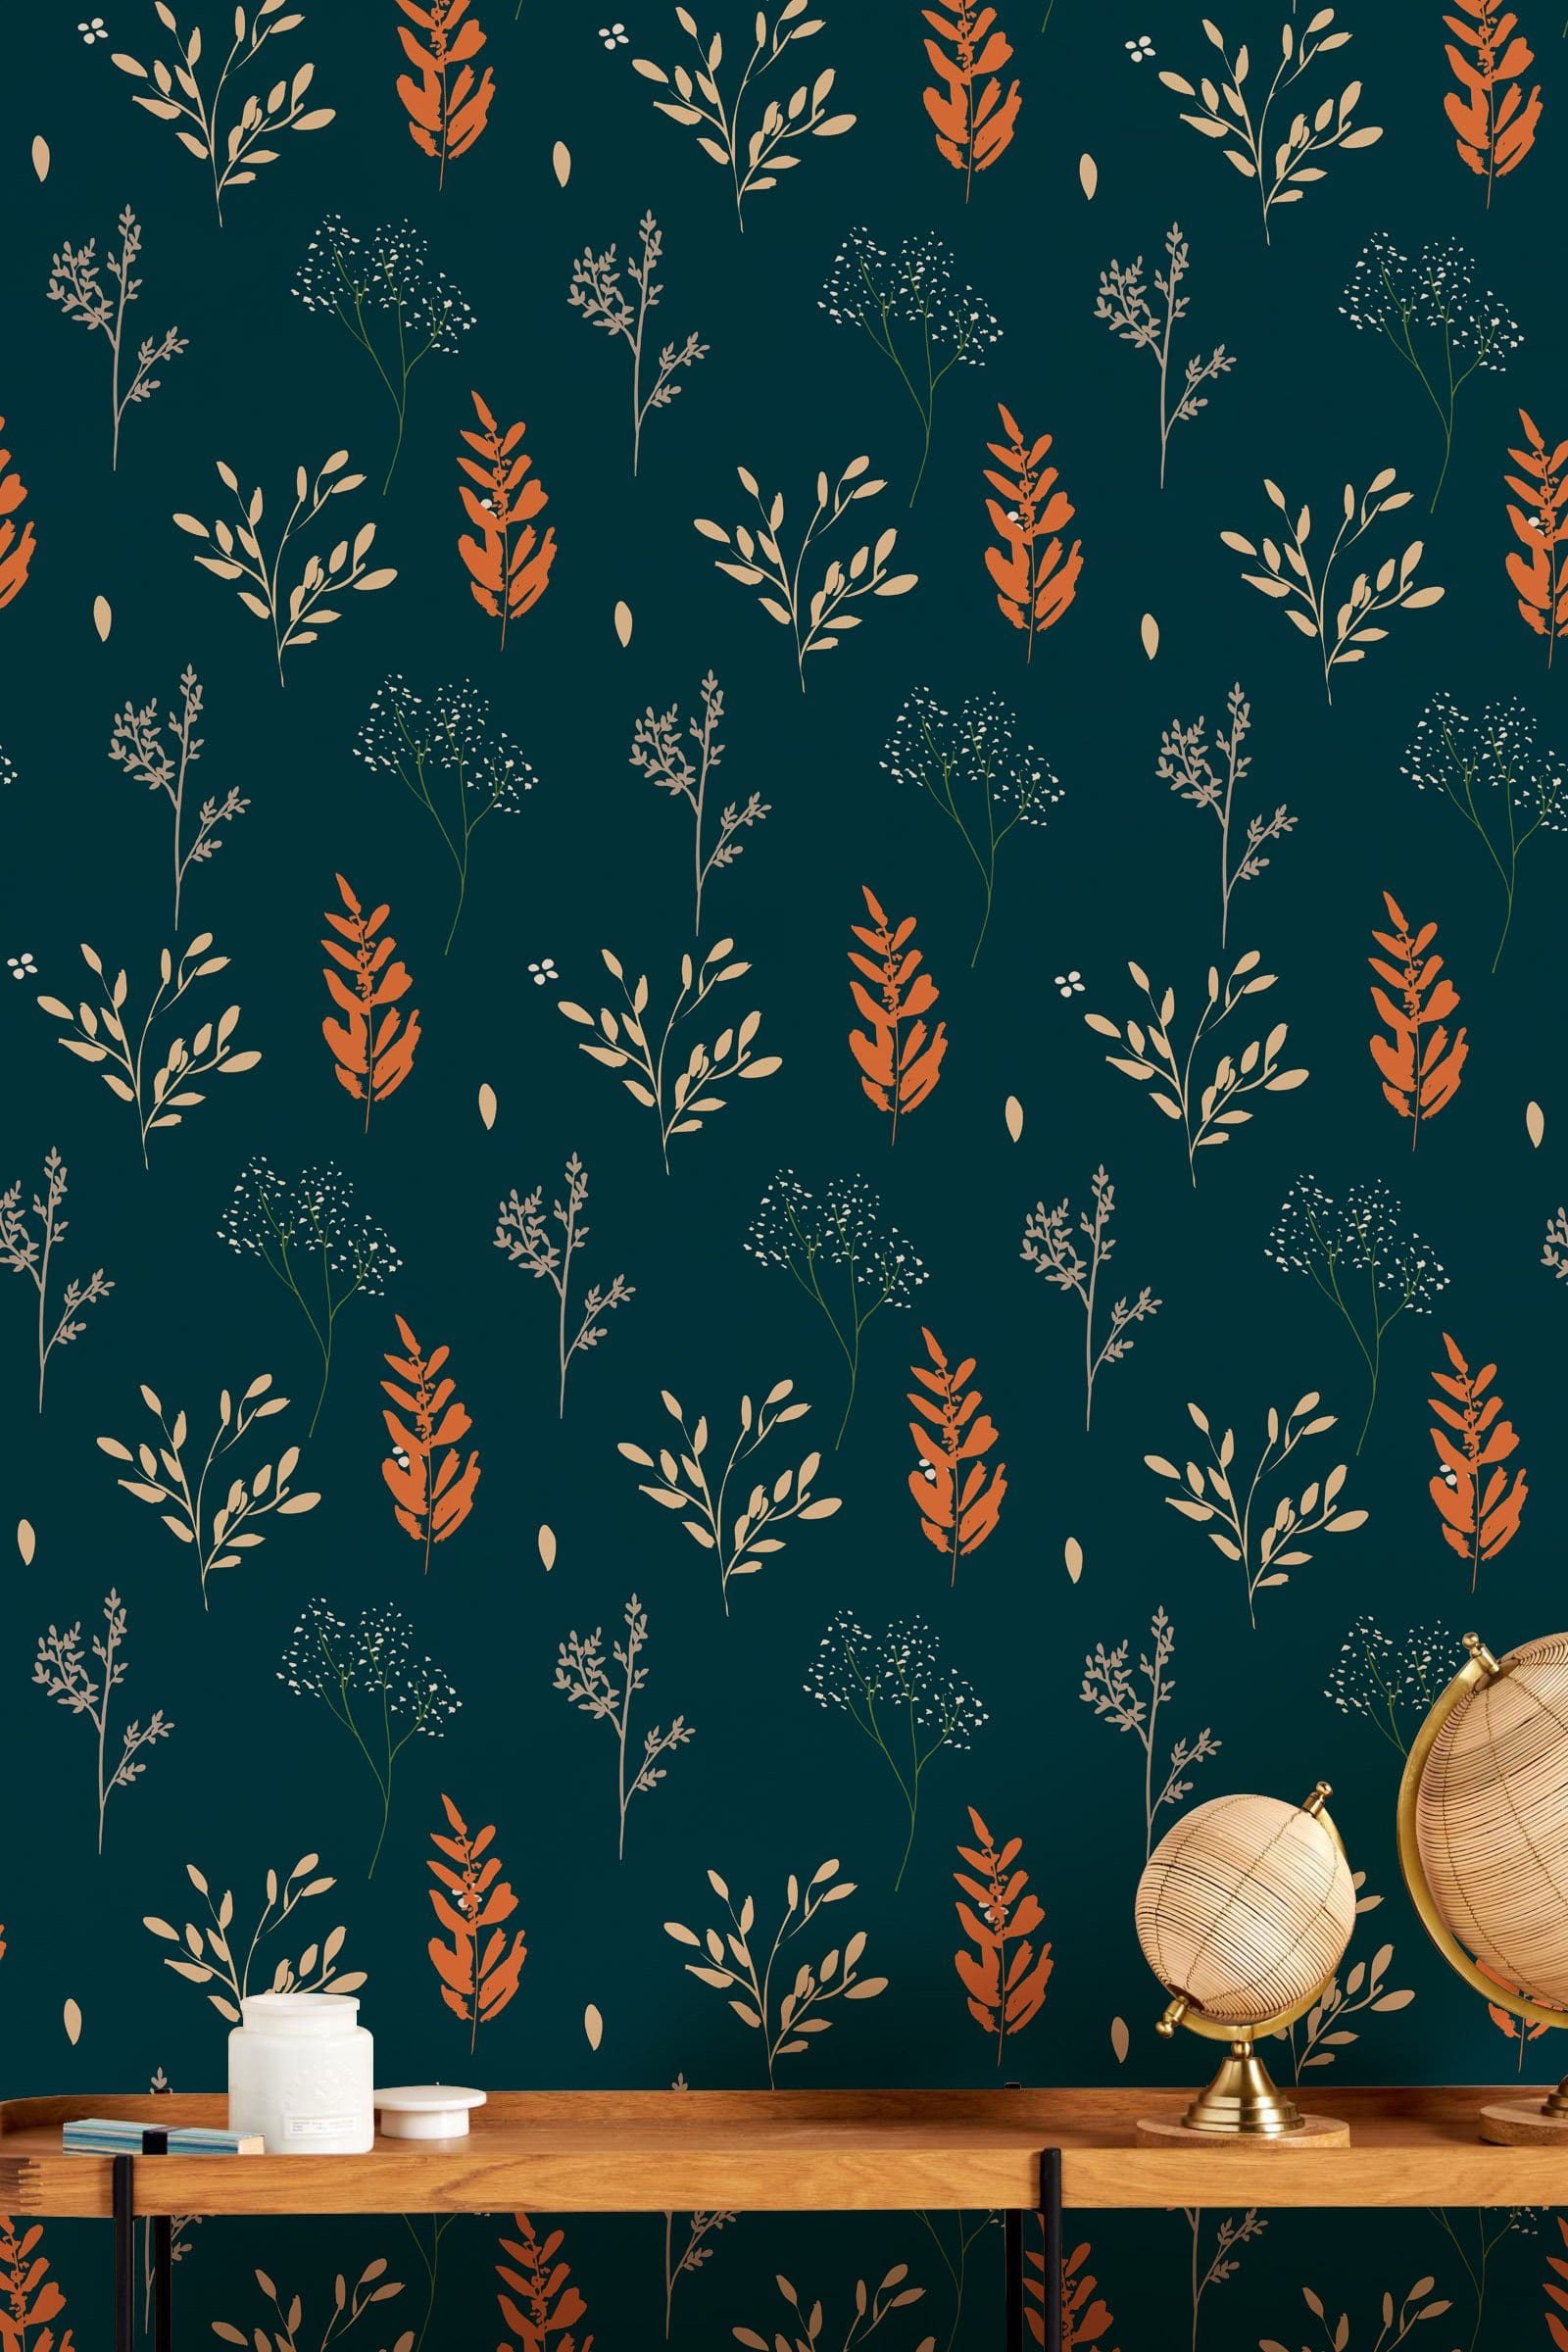 Rice Ears Pattern Wallpaper Mural for Use in the Decorating of the Study Room